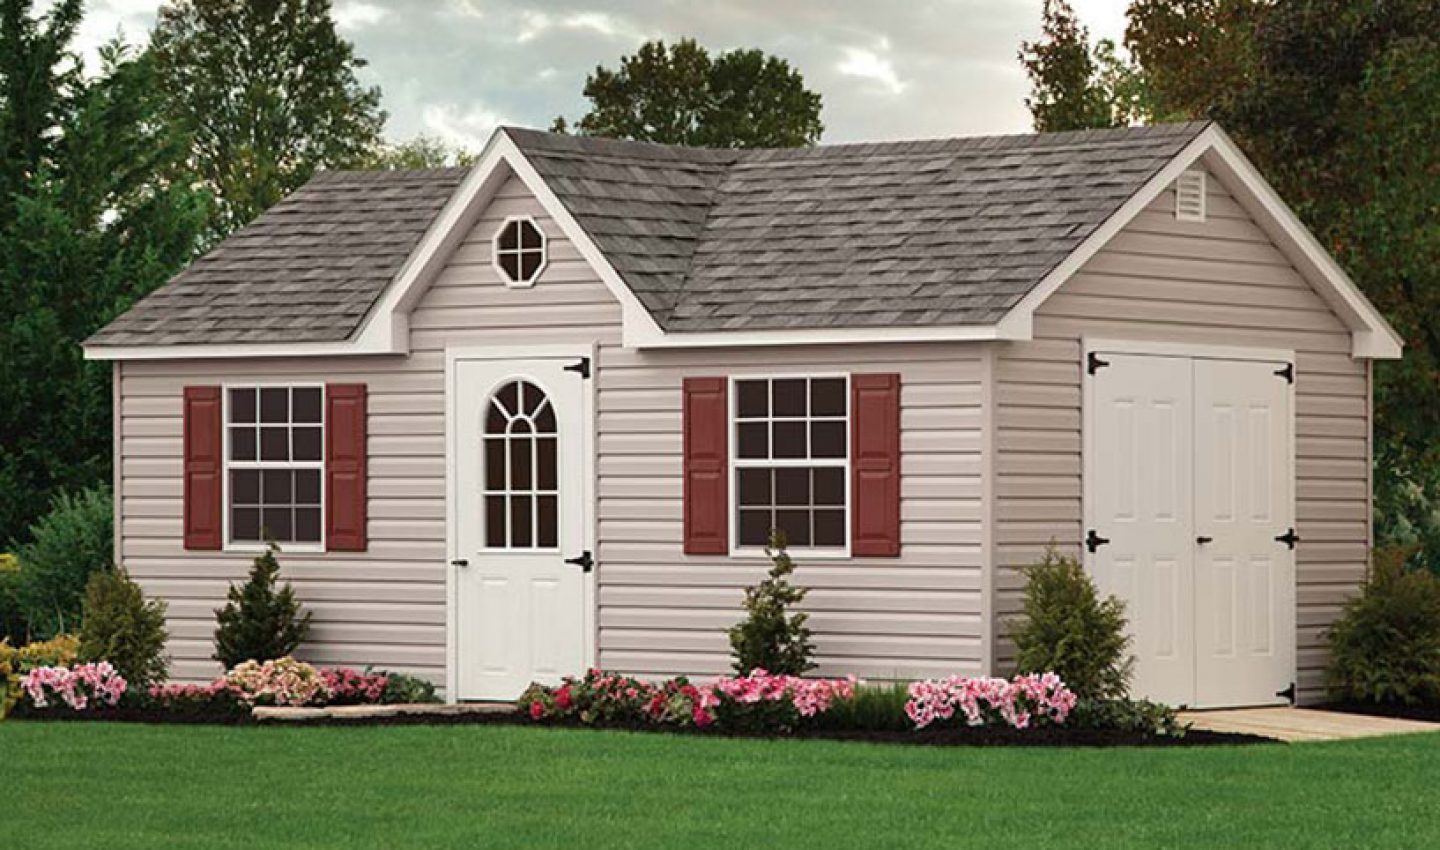 Dormer Sheds & Other Premium Styles